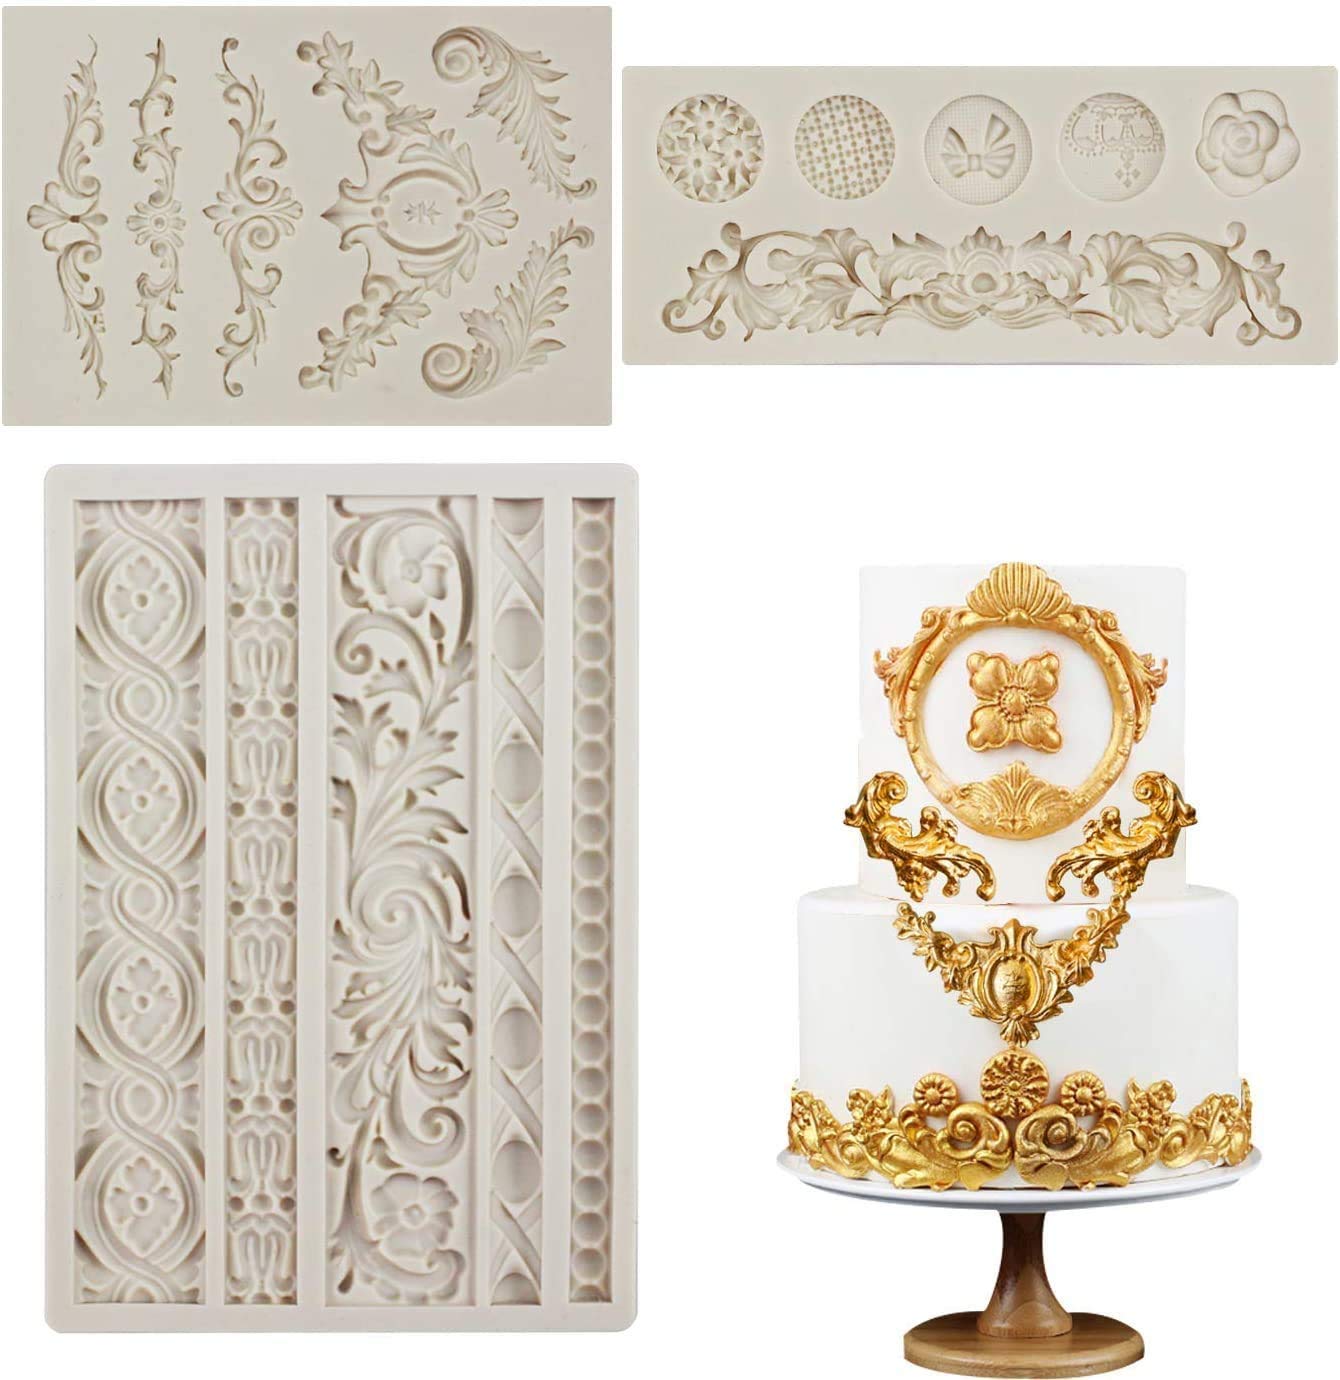 3 Pieces Baroque Fondant Molds Scroll Border Lace Silicone Molds Curlicues Gum Paste Candy Chocolate Molds for Cake Decorating Sugar Craft Polymer Clay